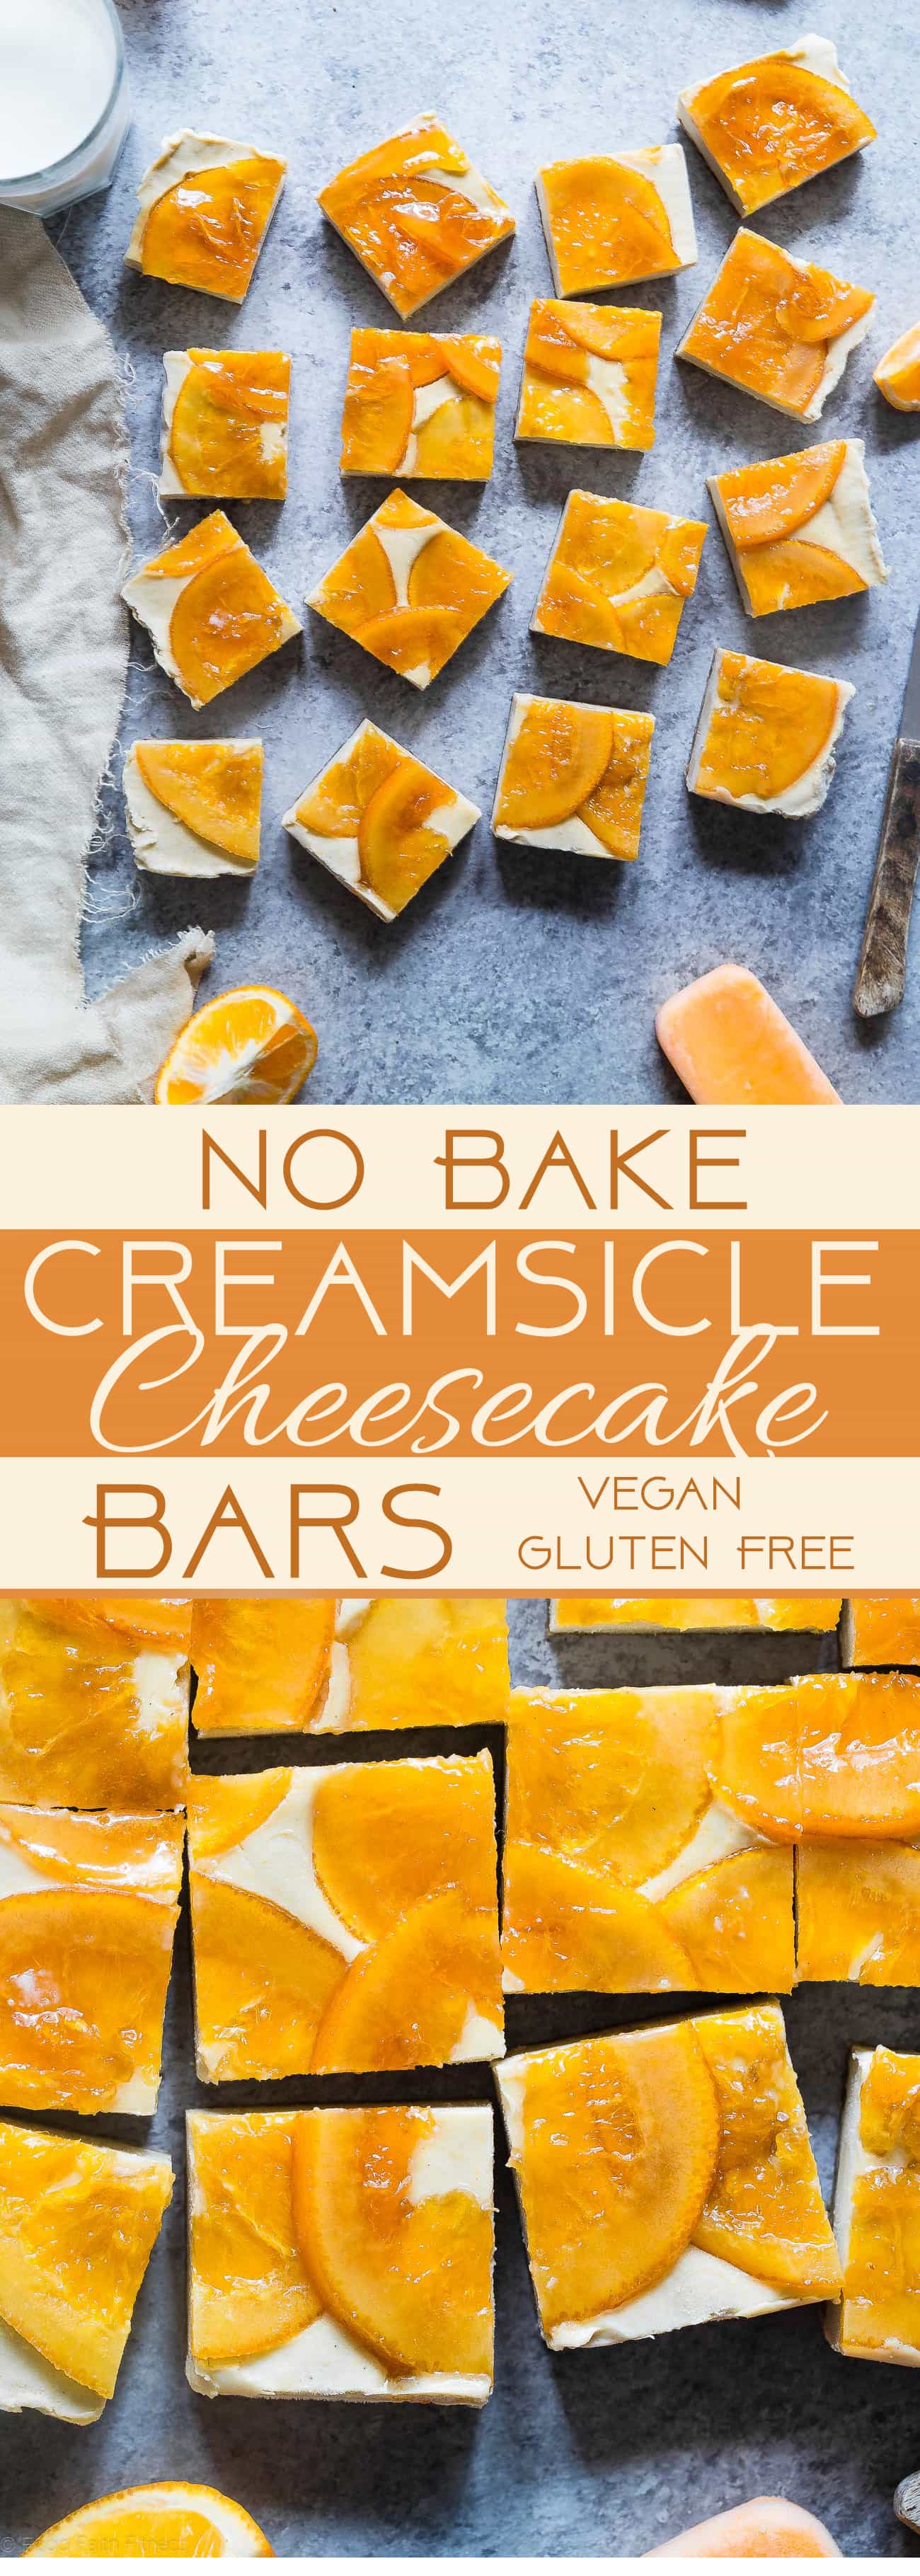 Healthy No Bake Creamsicle Cheesecake Bars - These raw vegan cheesecake bars have a creamy vanilla base, an orange topping and taste like a creamsicle! They're a dairy and gluten free treat for the Summer! | Foodfaithfitness.com | @FoodFaithFit